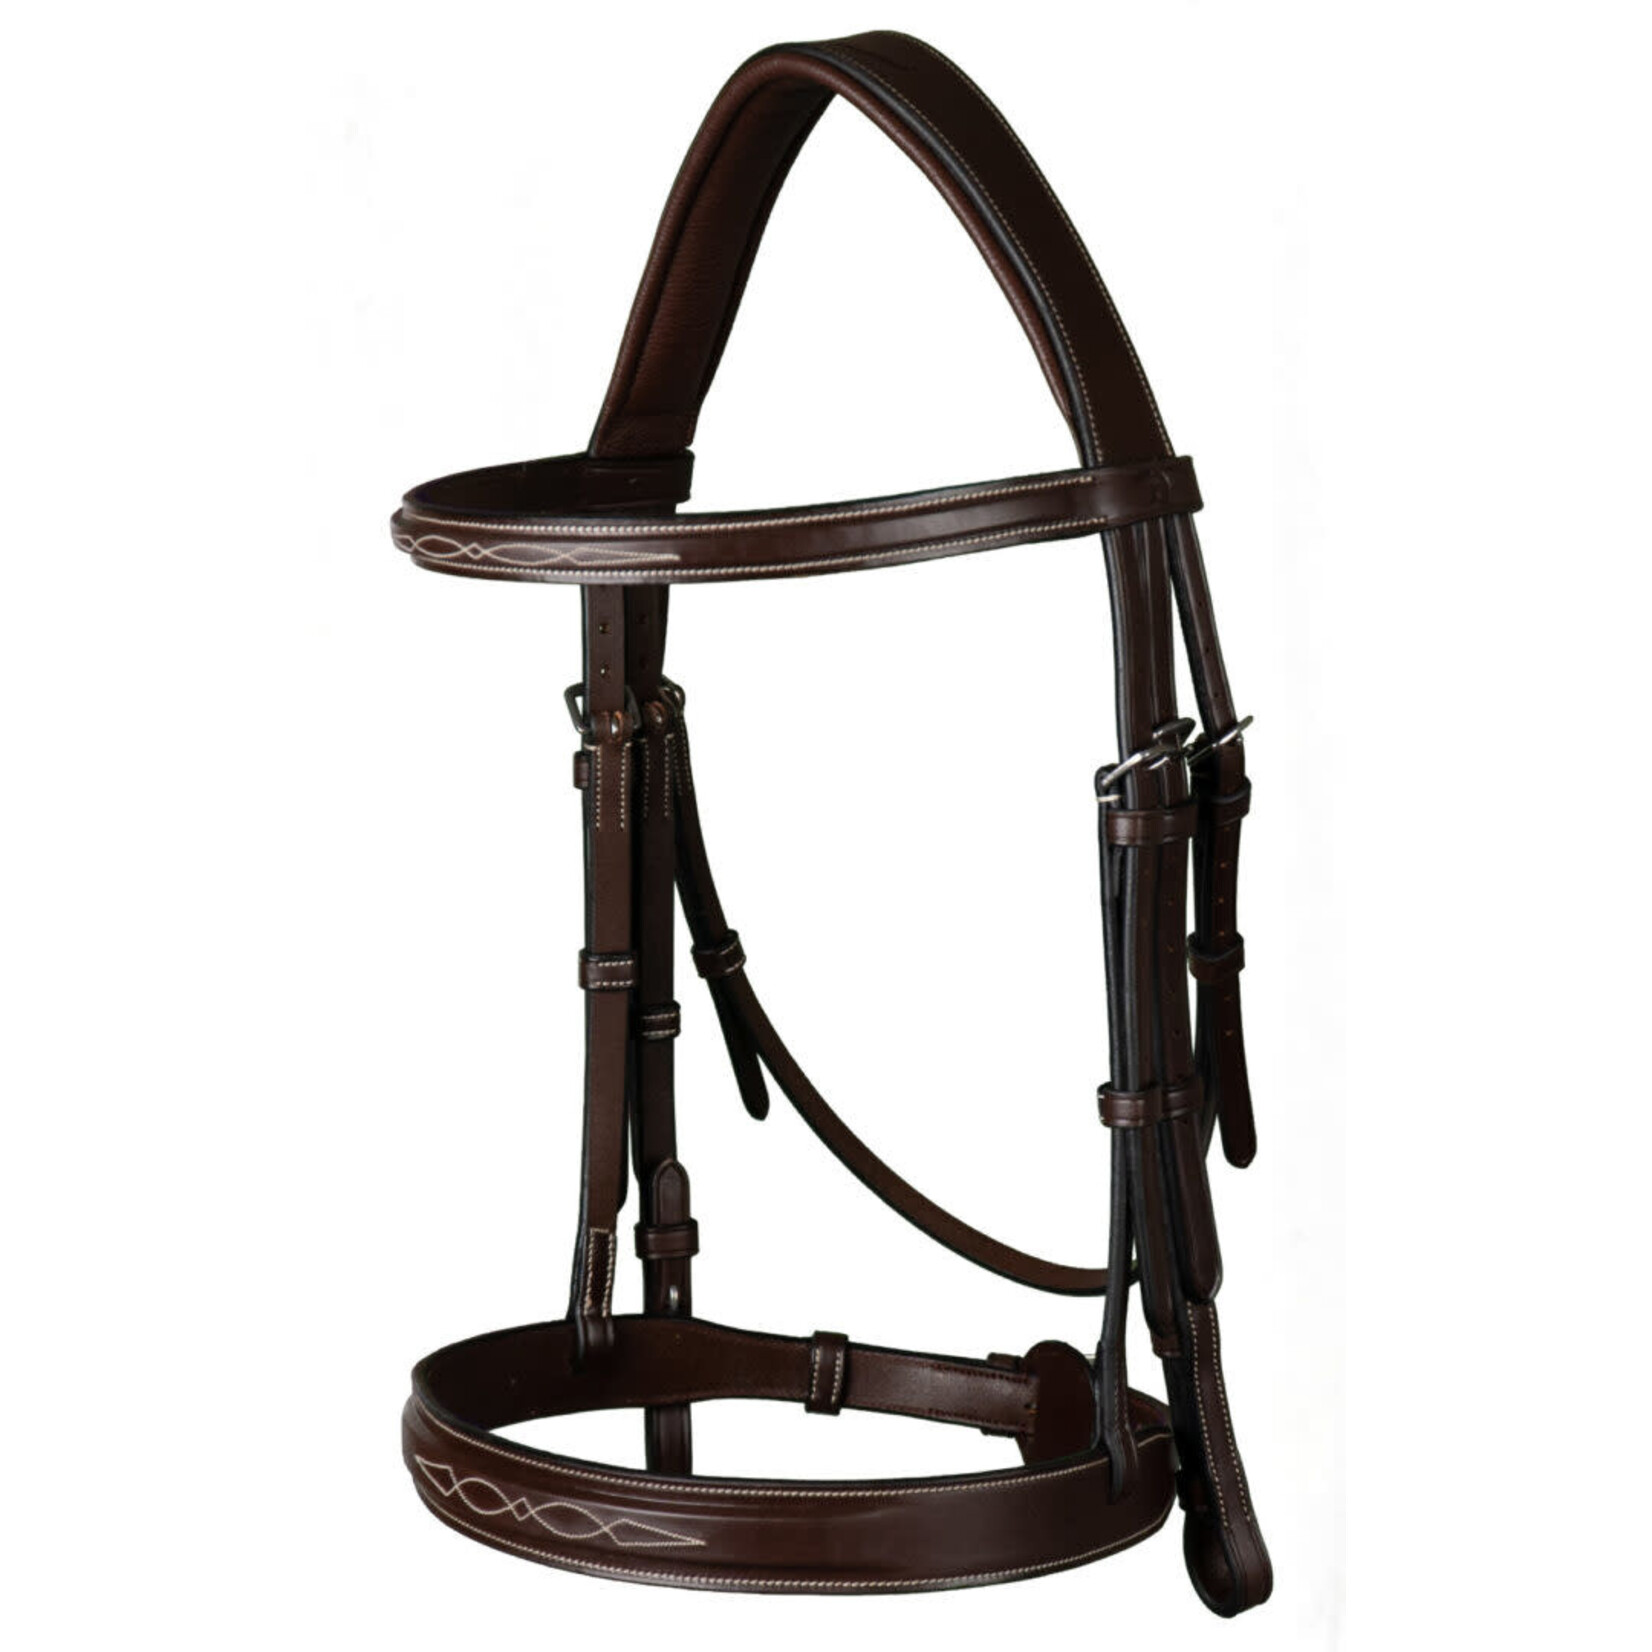 Dy'on USKOAK Dy’on Cavesson Hunter Noseband Bridle